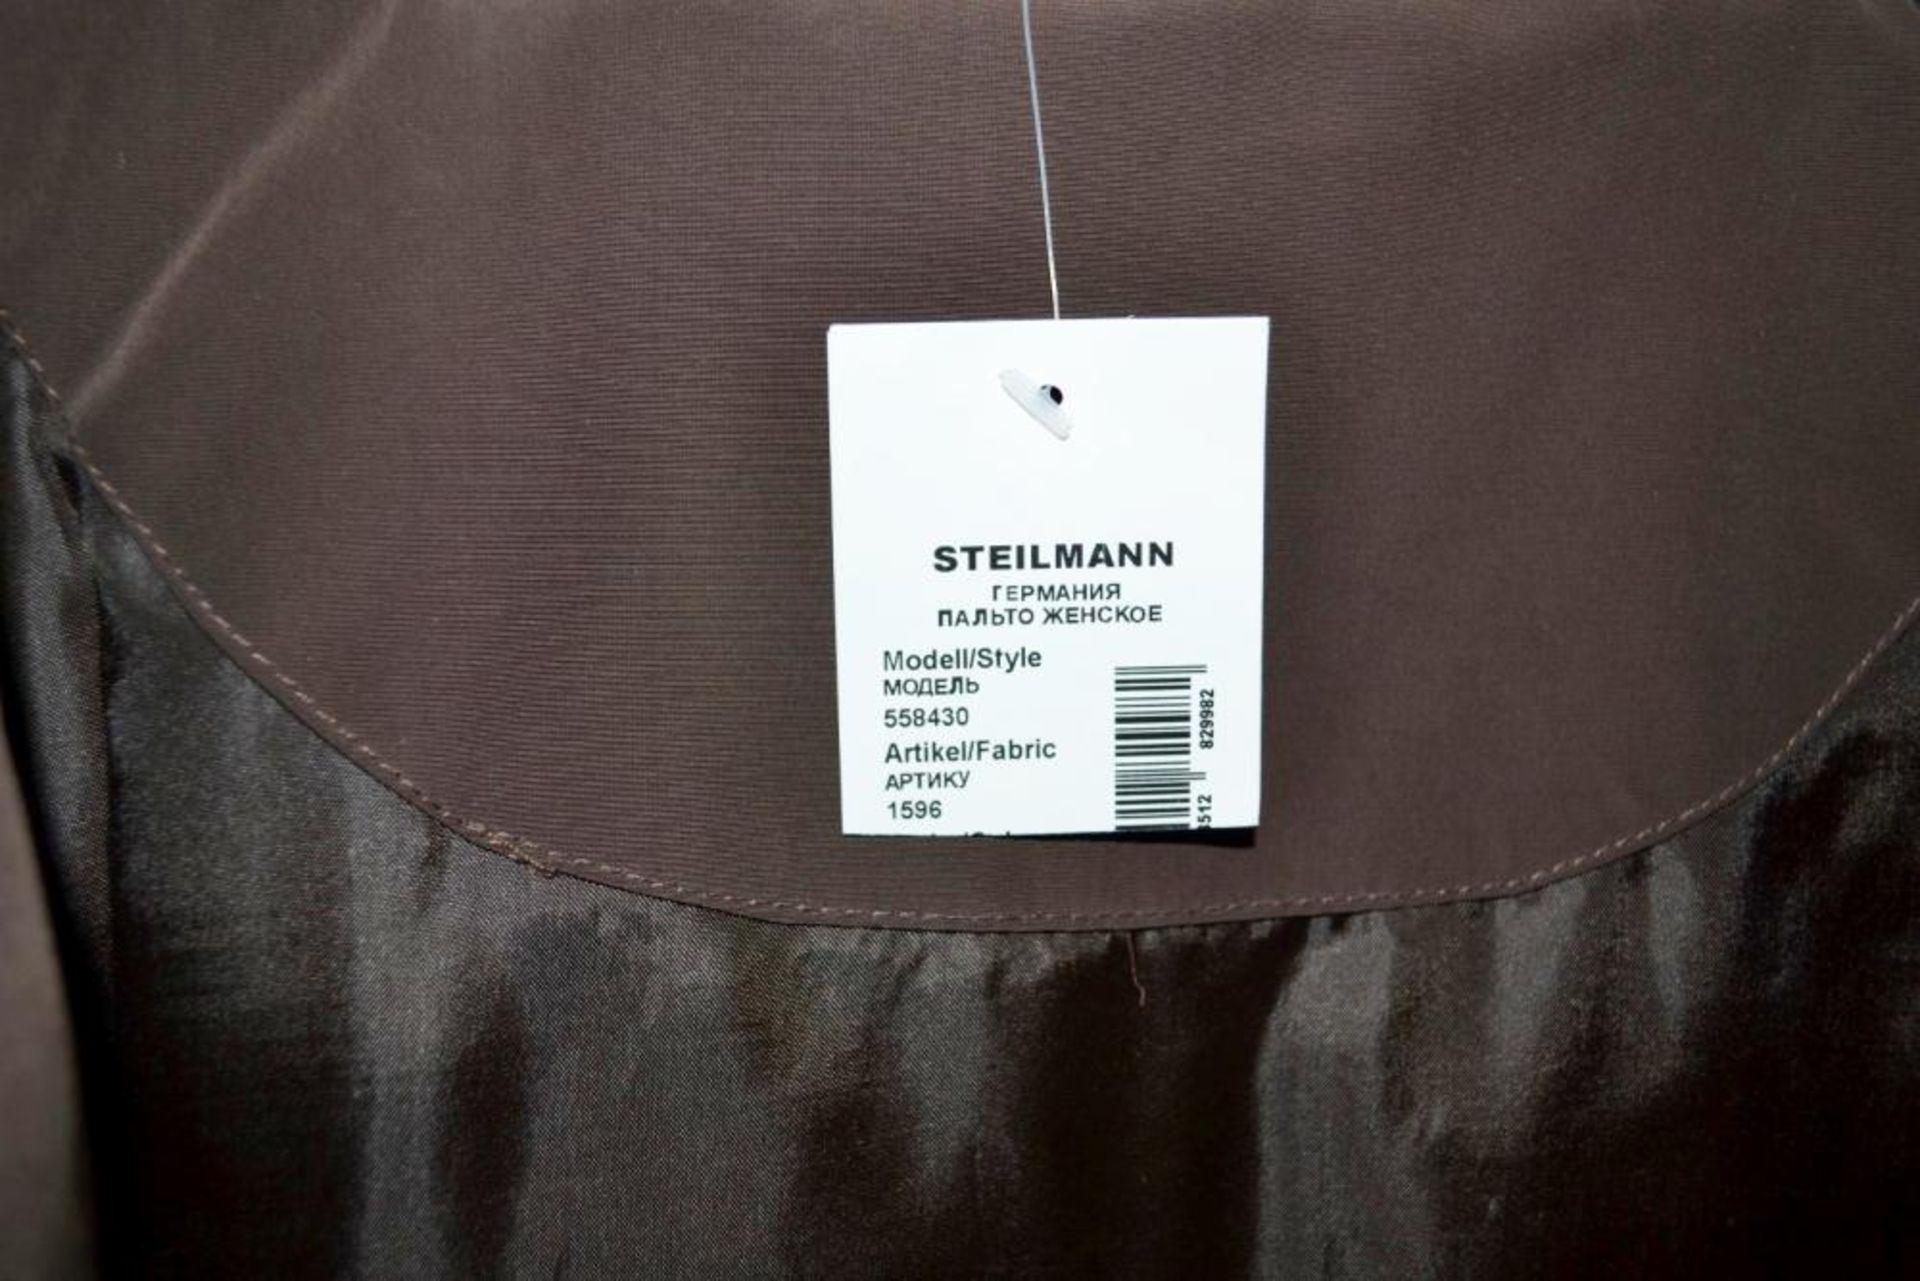 1 x Steilmann Womens Padded Winter Coat In A Rich Brown Moleskin-style Fabric - UK Size 12 - New Sam - Image 3 of 4